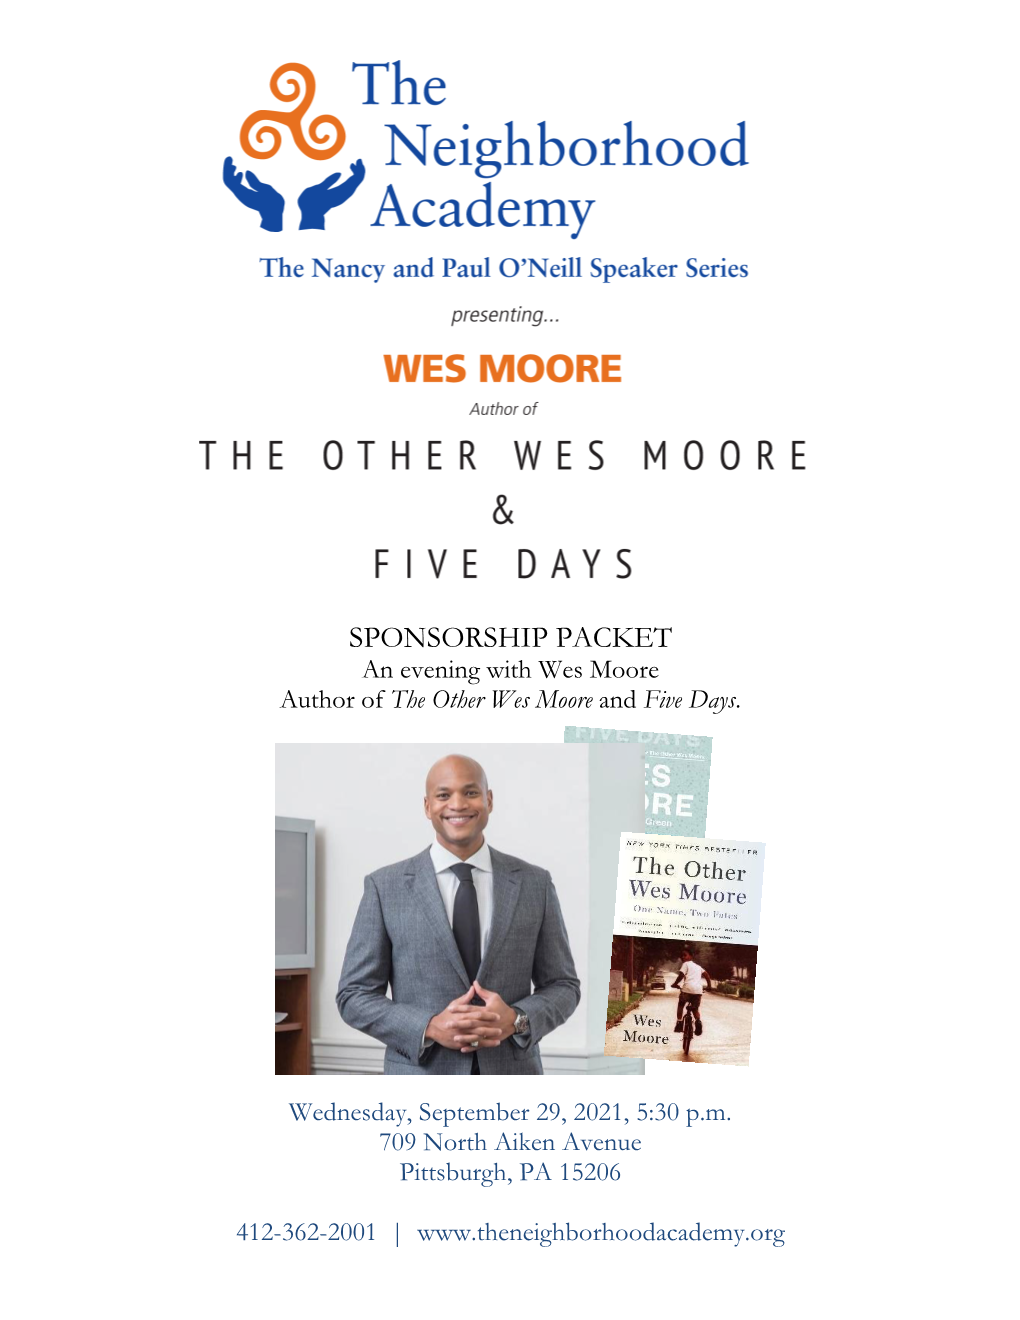 SPONSORSHIP PACKET an Evening with Wes Moore Author of the Other Wes Moore and Five Days